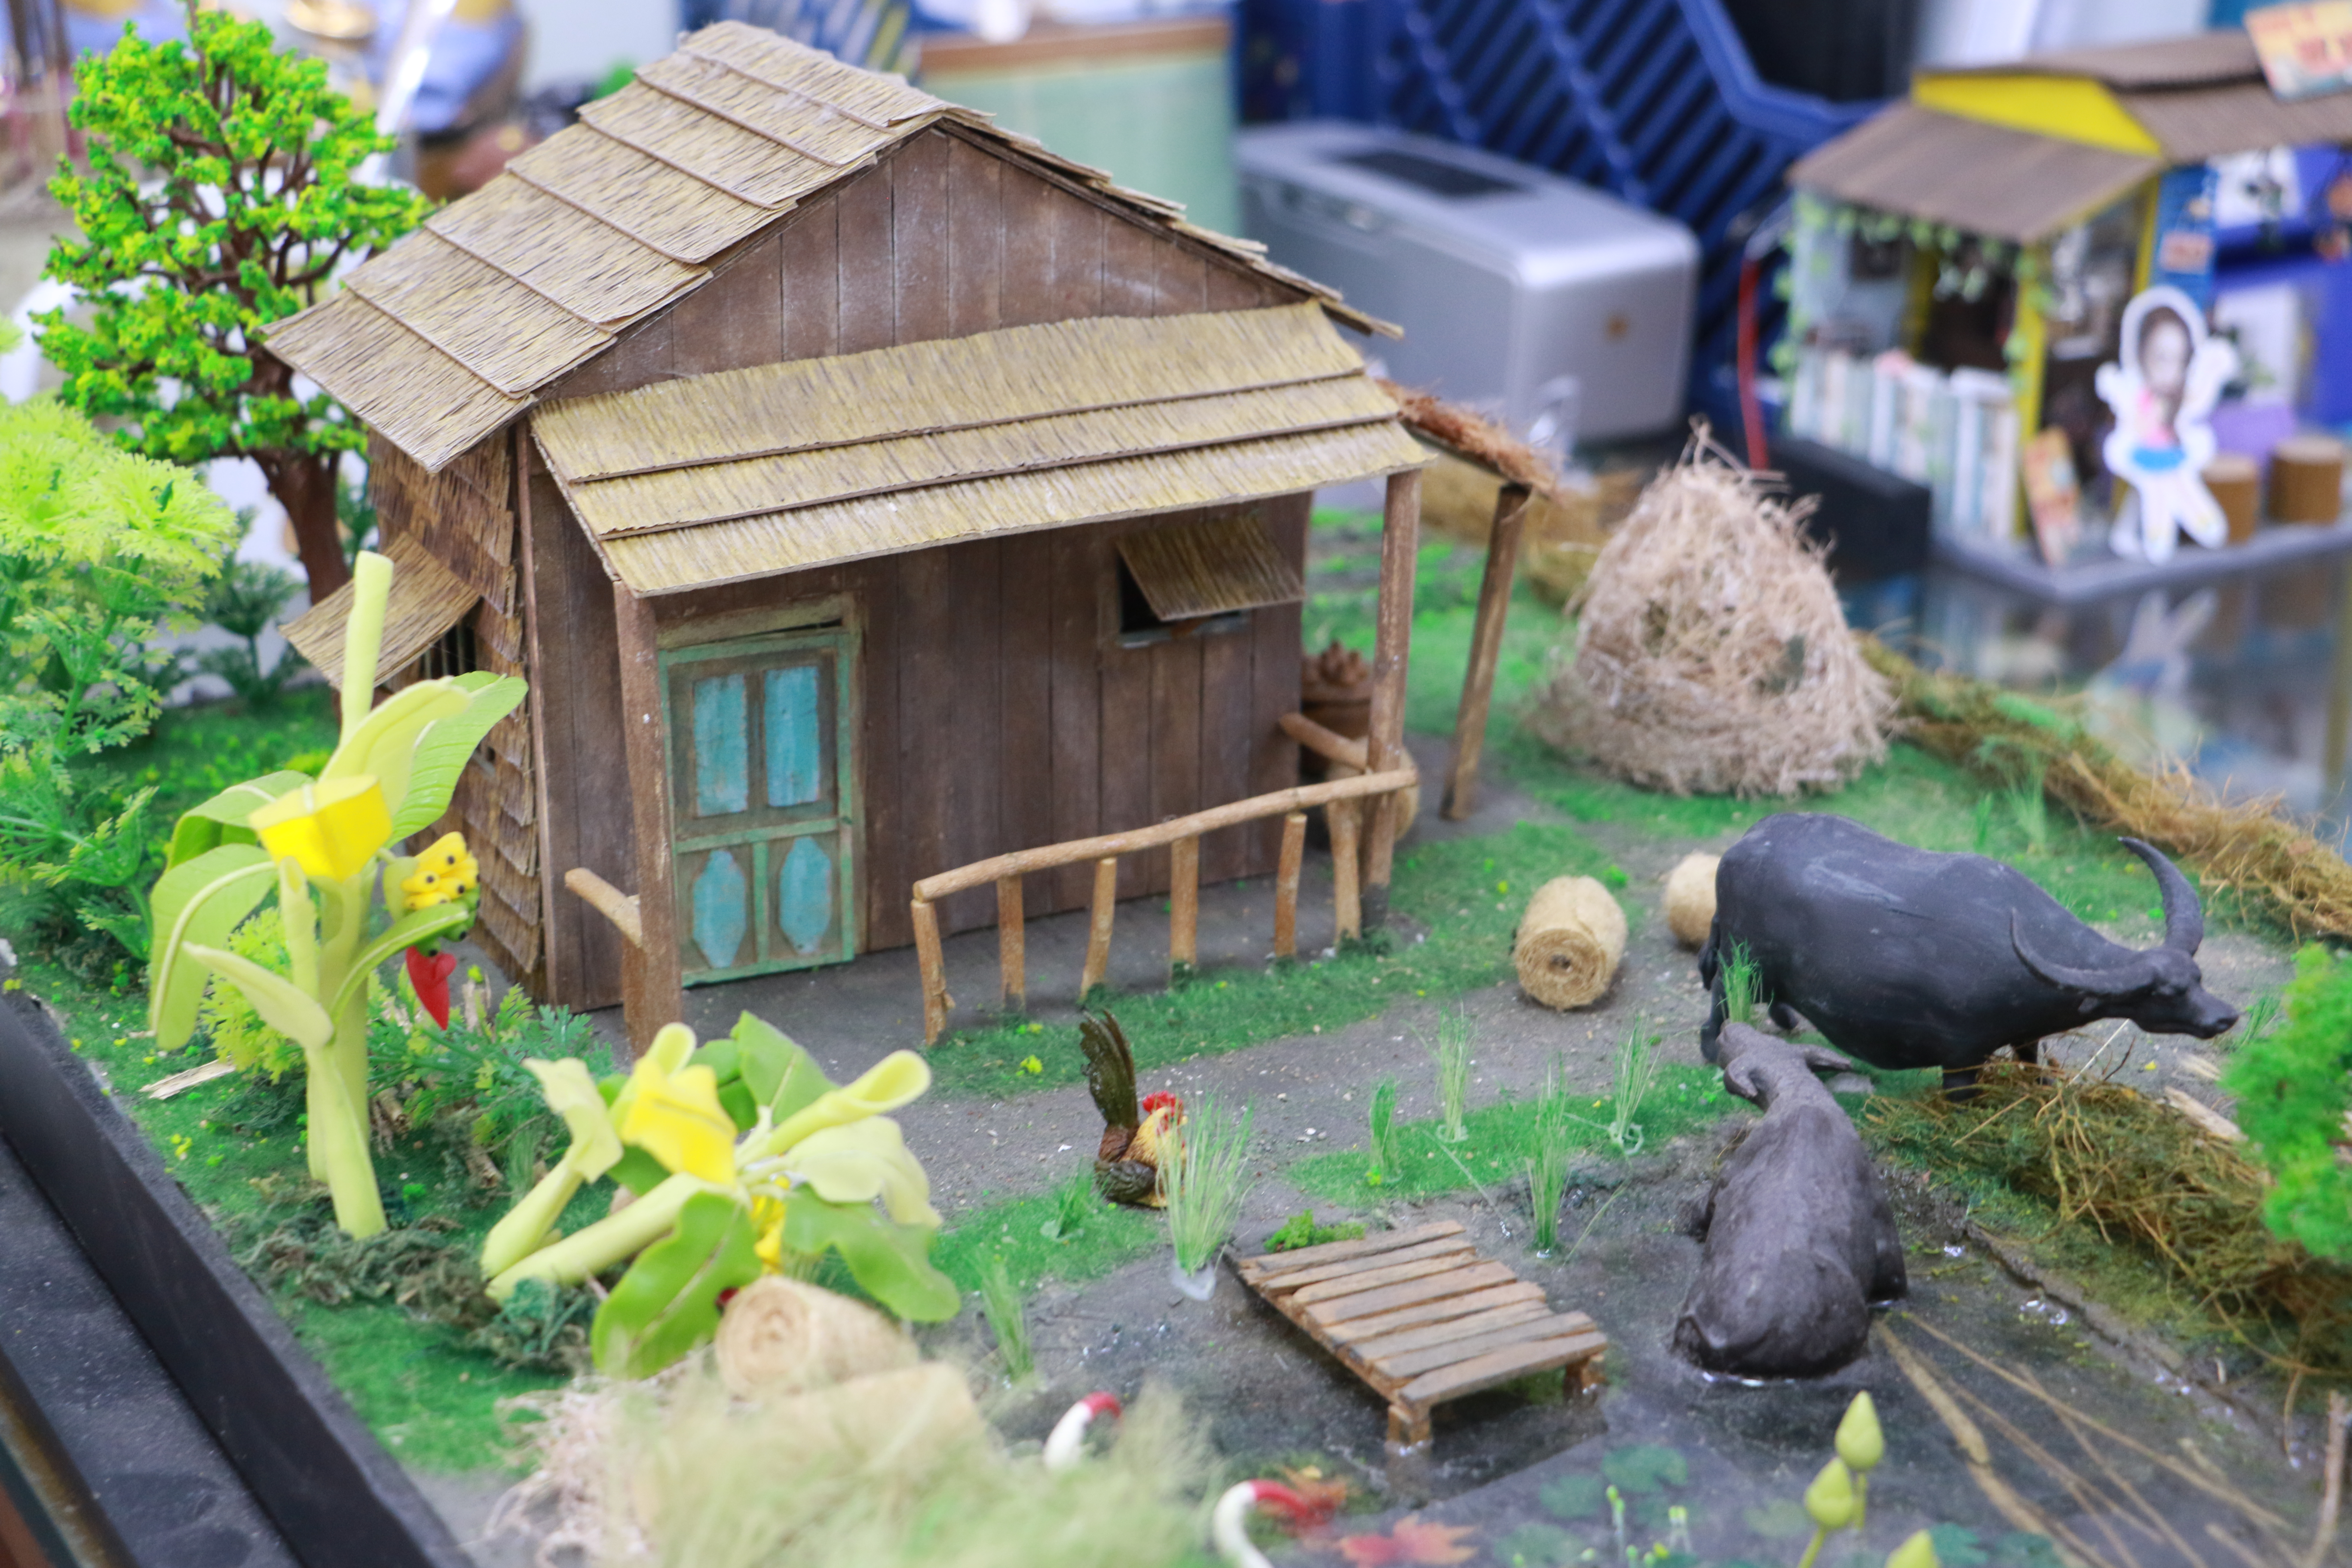 A miniature by The Gioi Ti Hon mimicking a house in the countryside of the Mekong Delta region in Vietnam. Photo: Binh Minh/Tuoi Tre